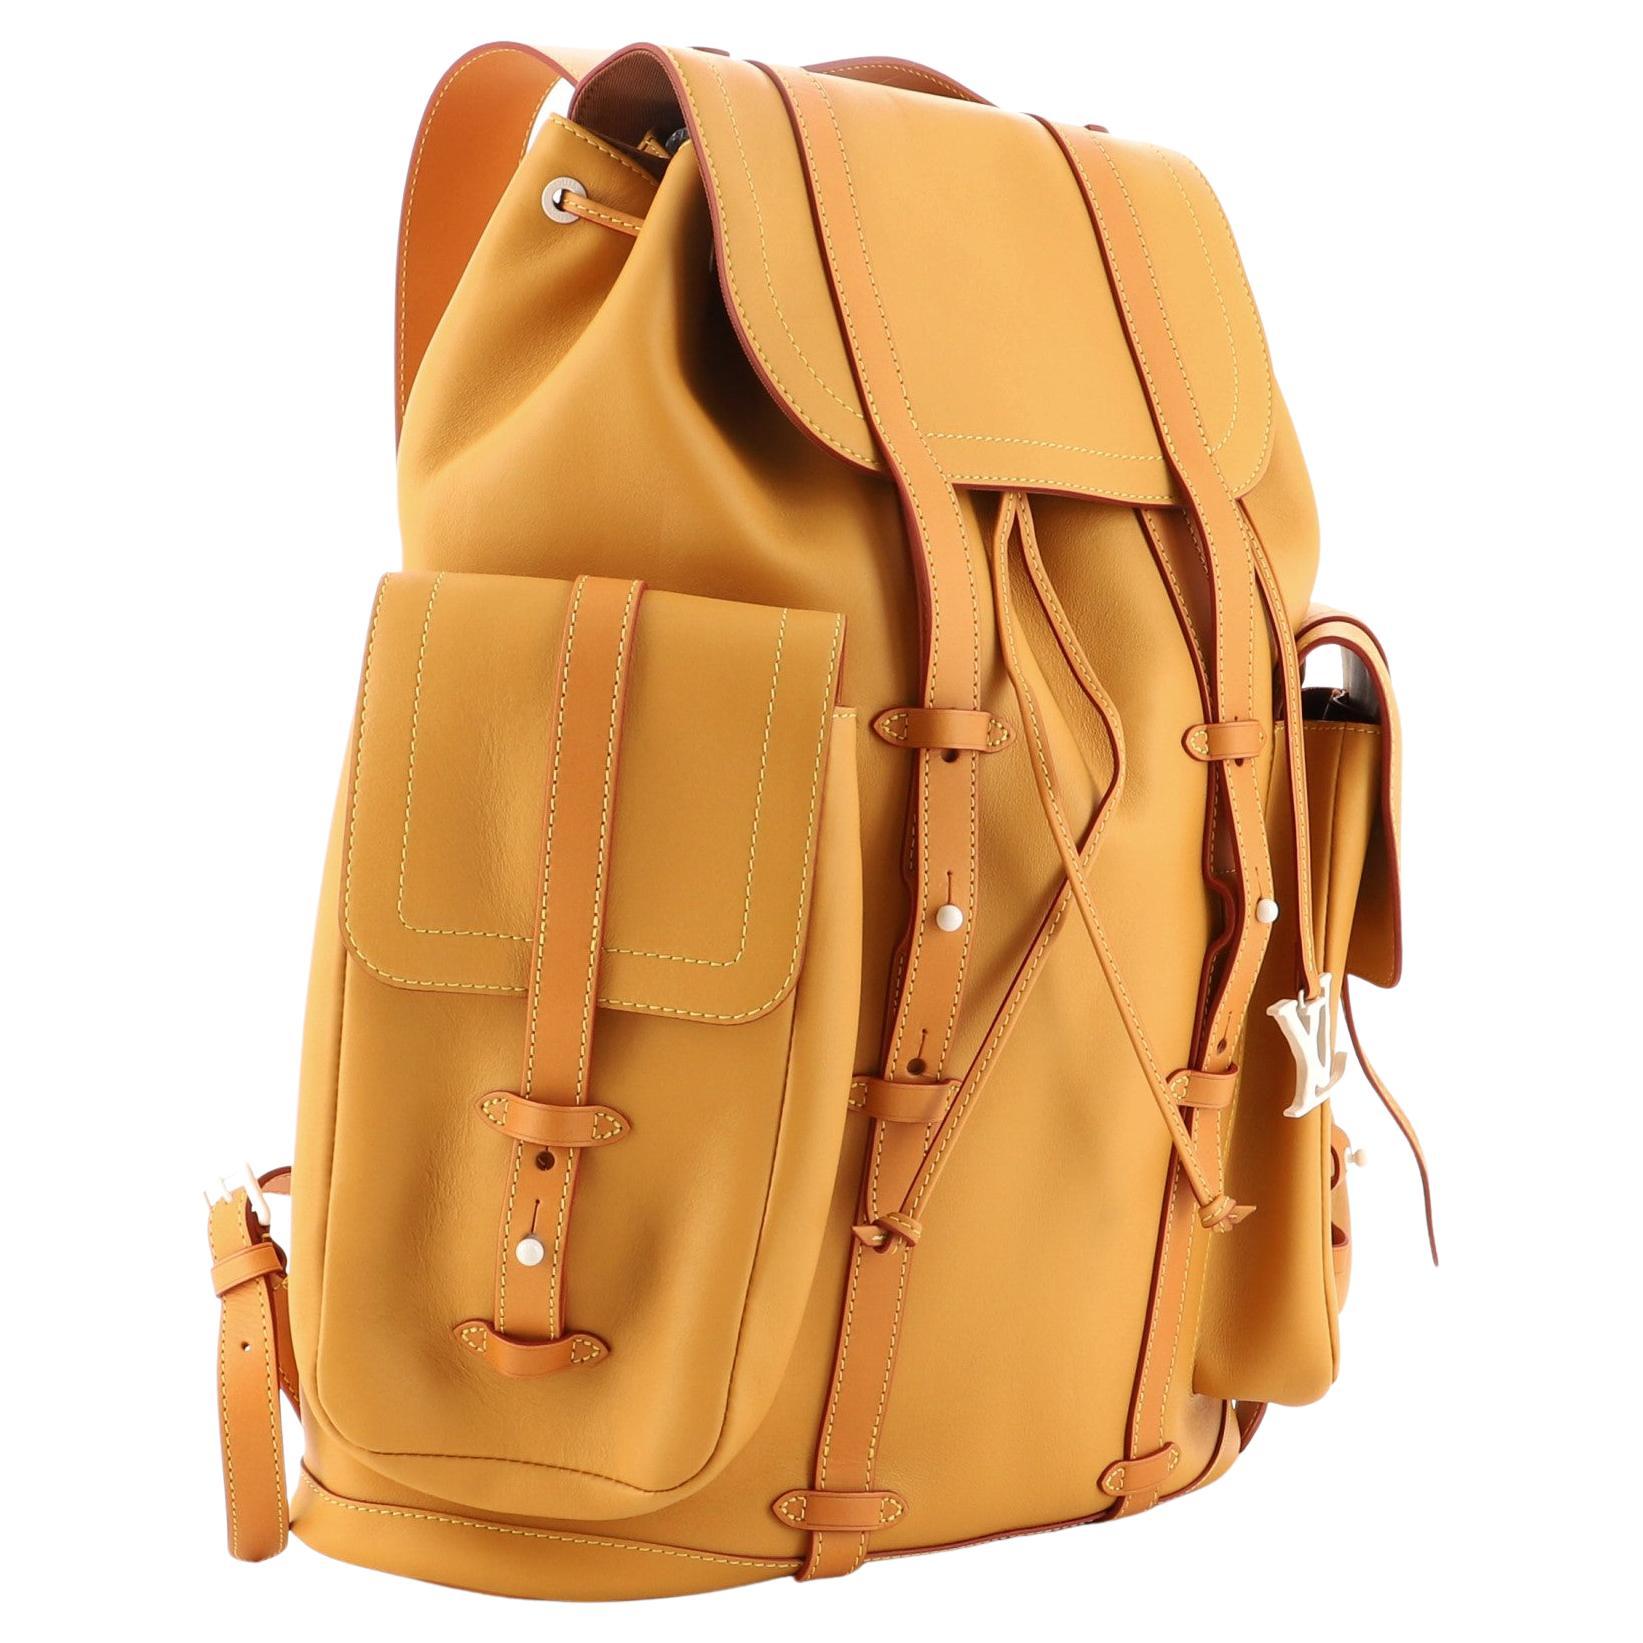 Louis Vuitton Christopher Backpack Price Guide